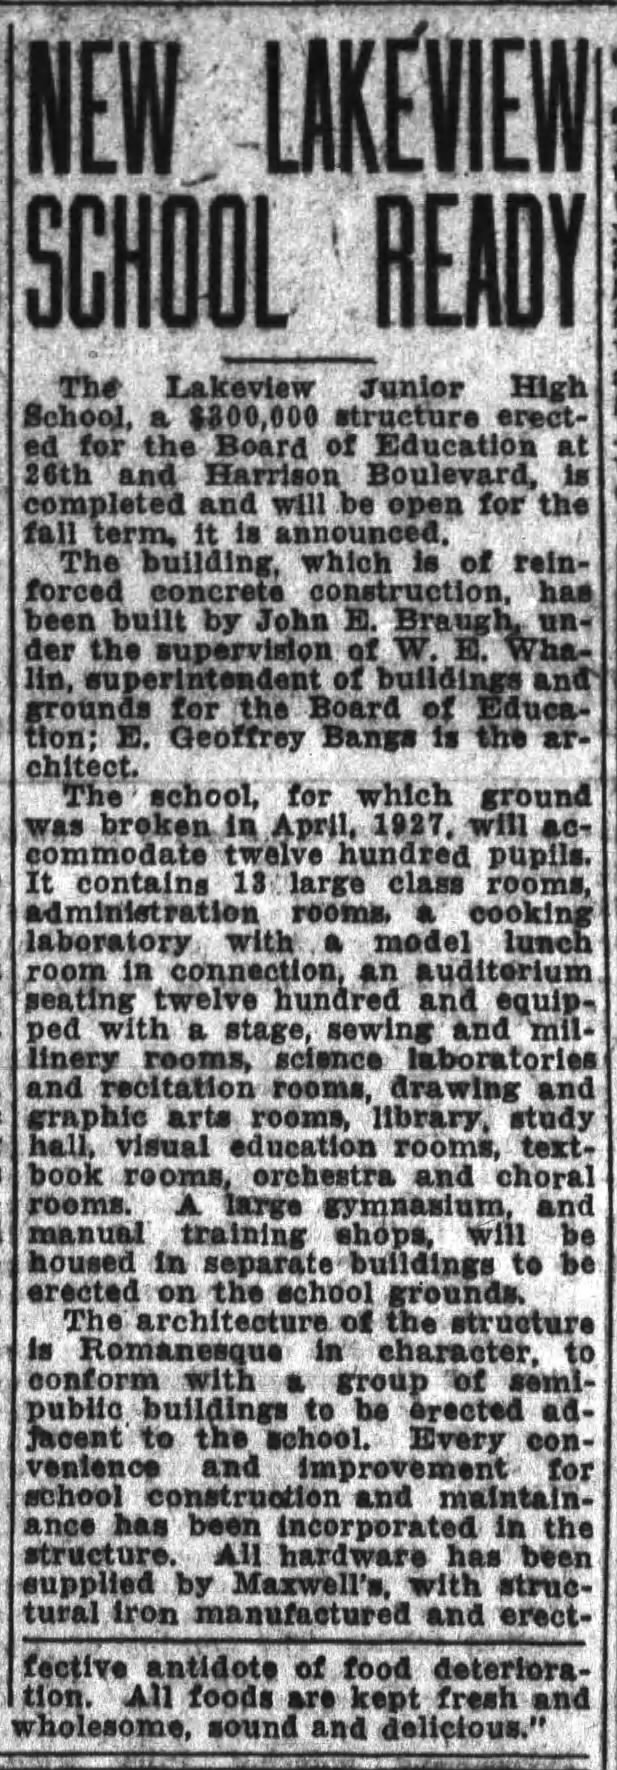 New Lakeview School Ready - Mar 25, 1928